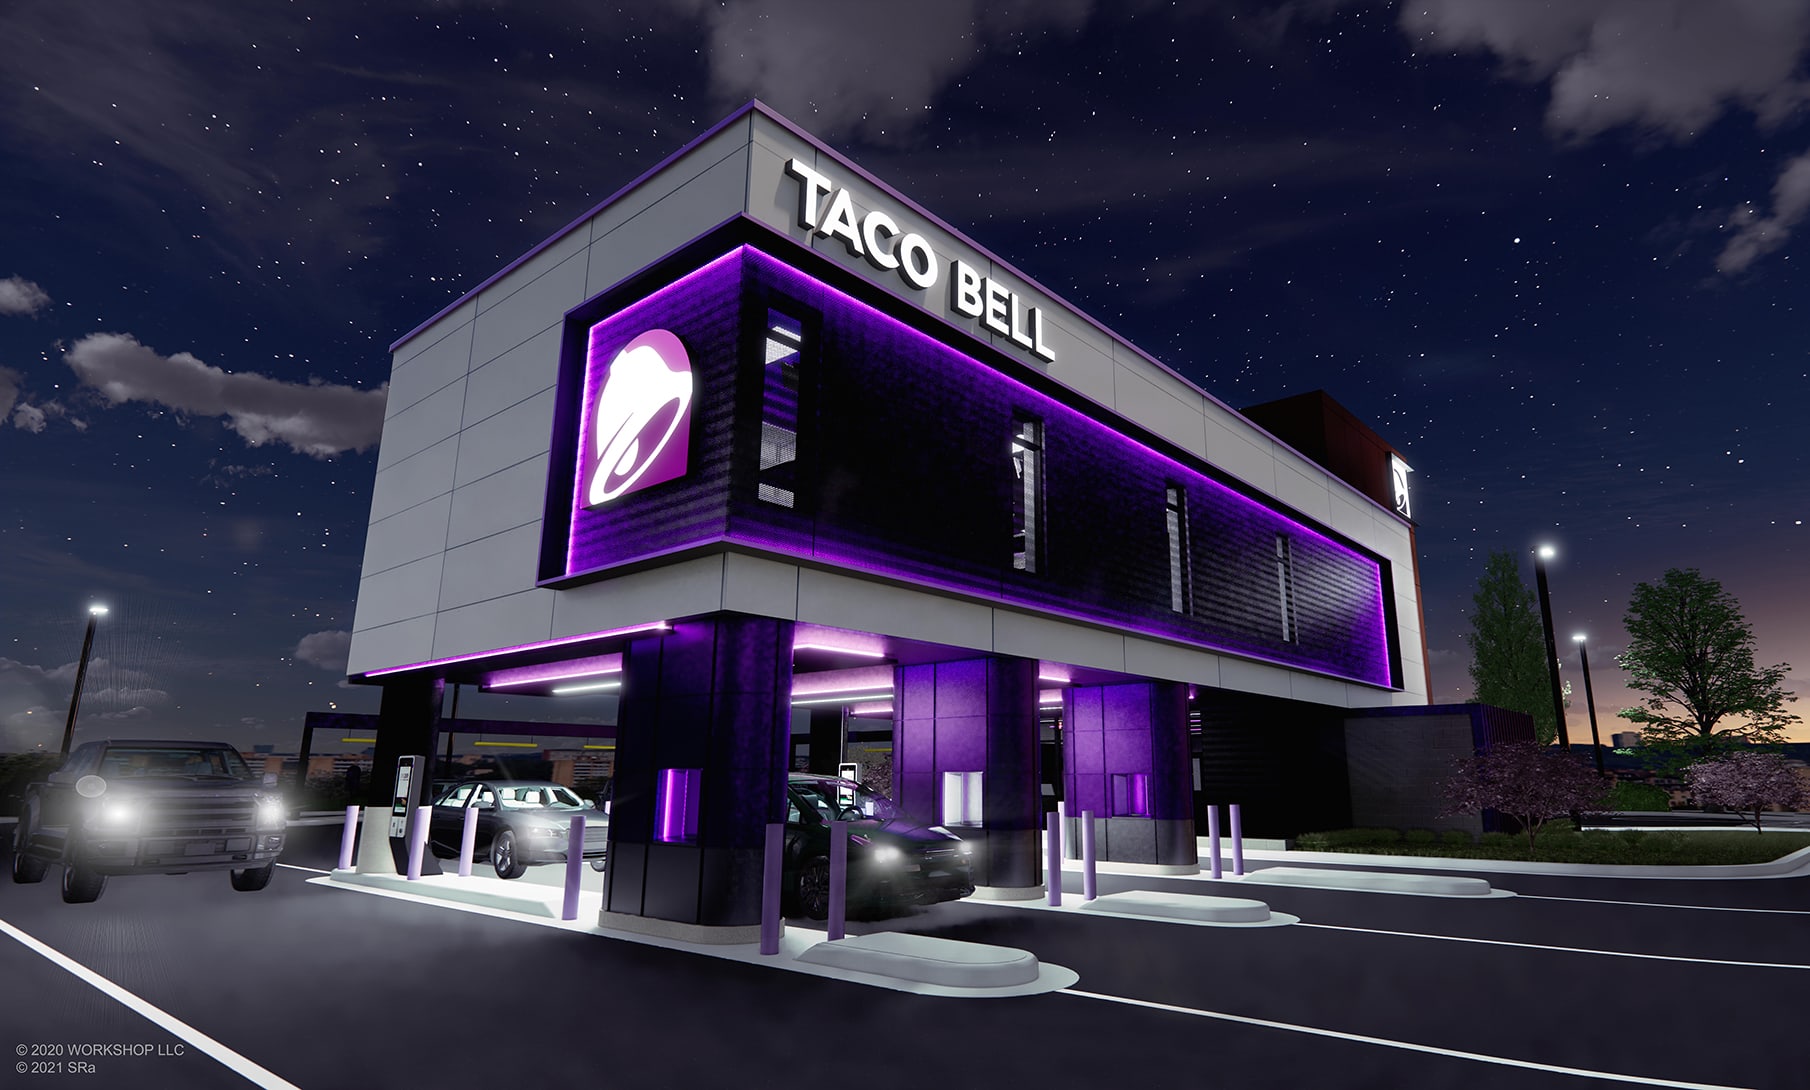 Look up in the sky!  It’s a bank!  It’s a toll booth! (Nope, it’s a new Taco Bell restaurant)